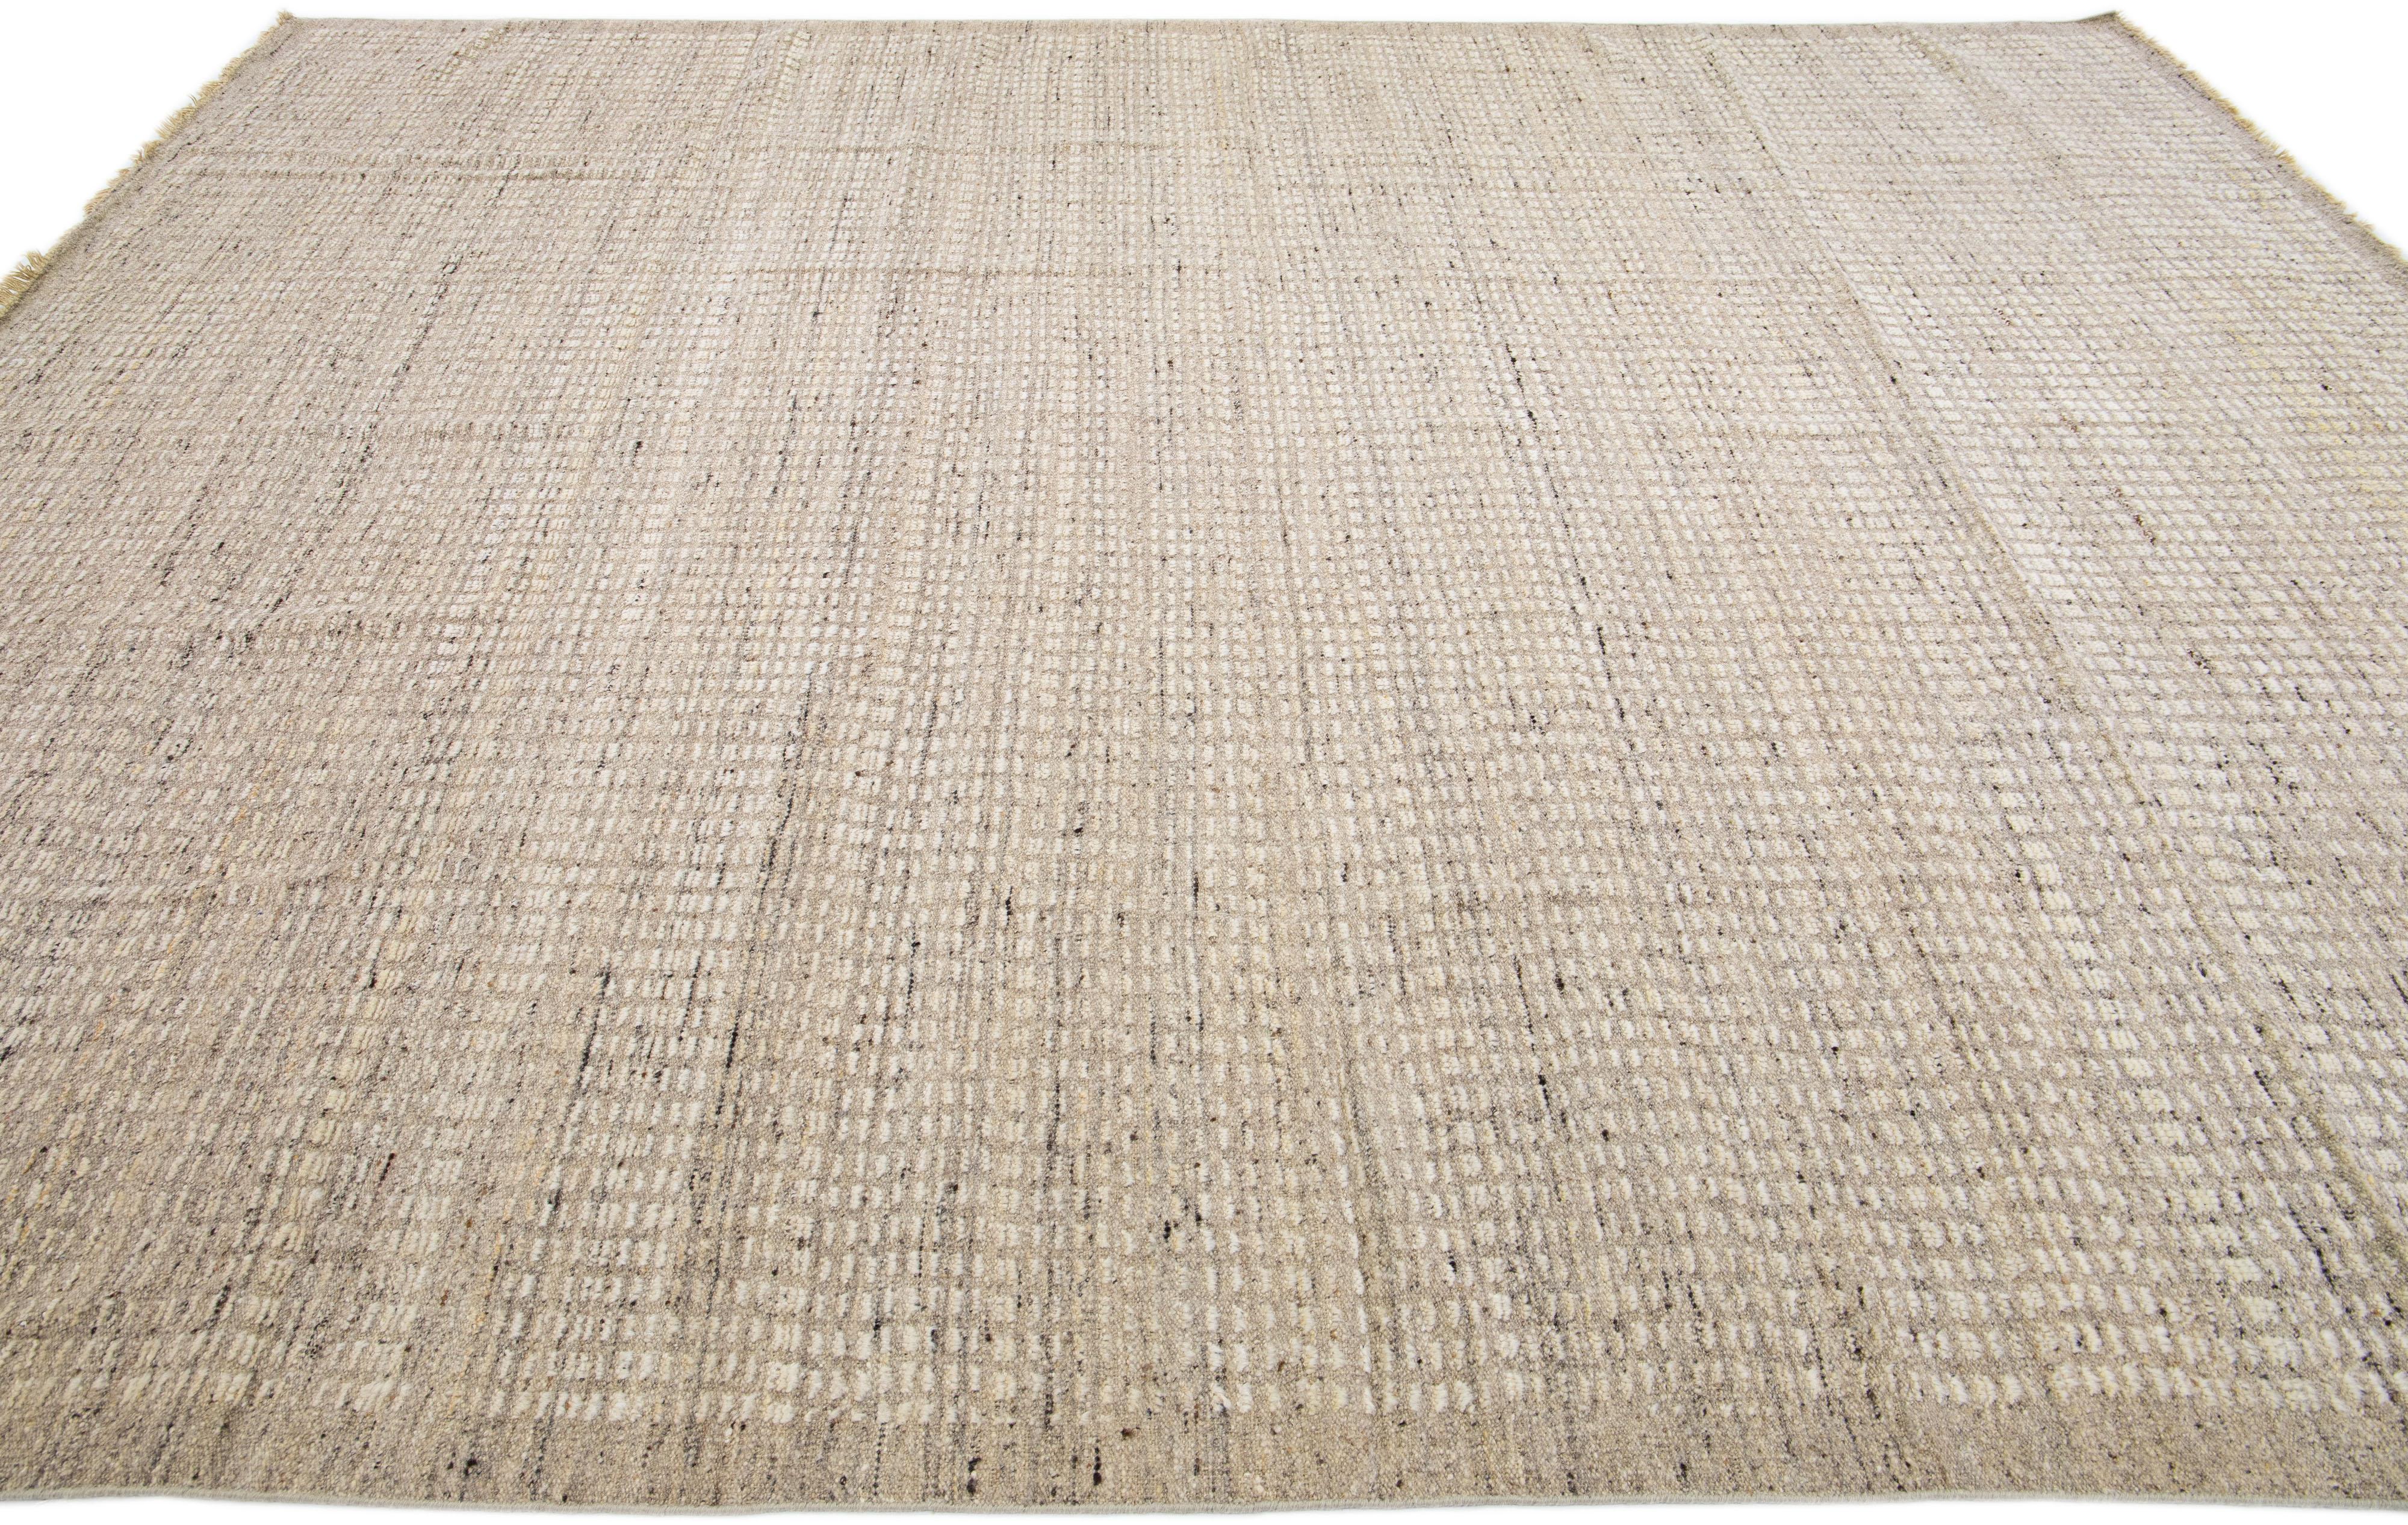 Modern Moroccan Style Handmade Subtle Pattern Beige Wool Rug In New Condition For Sale In Norwalk, CT